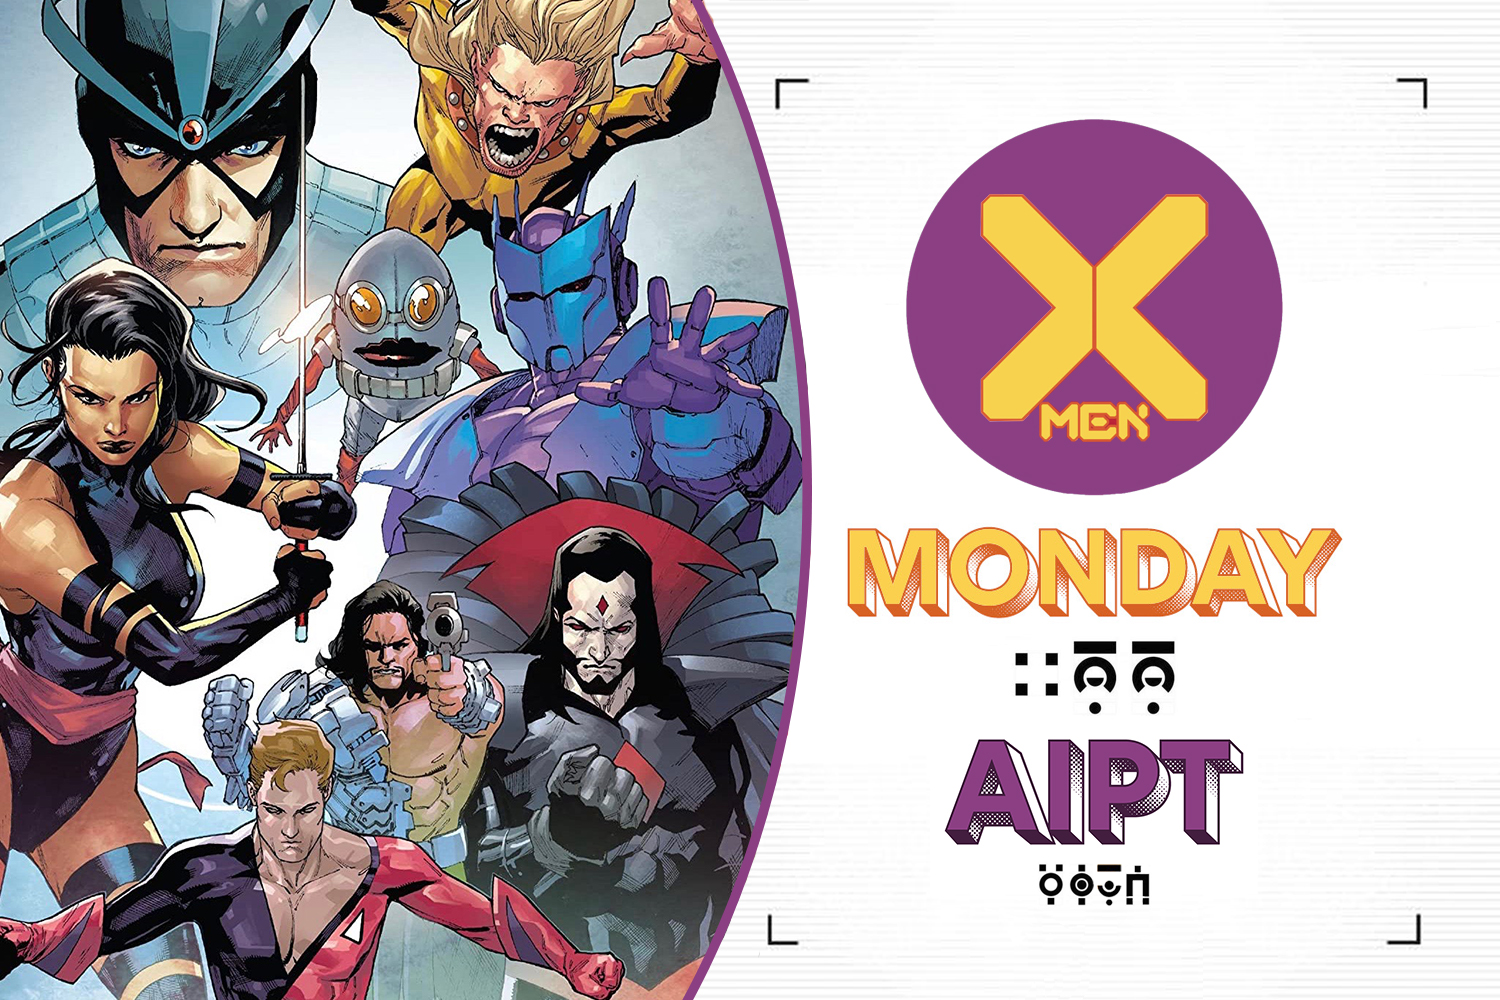 X-Men Monday #52 - Zeb Wells answers your Hellions questions